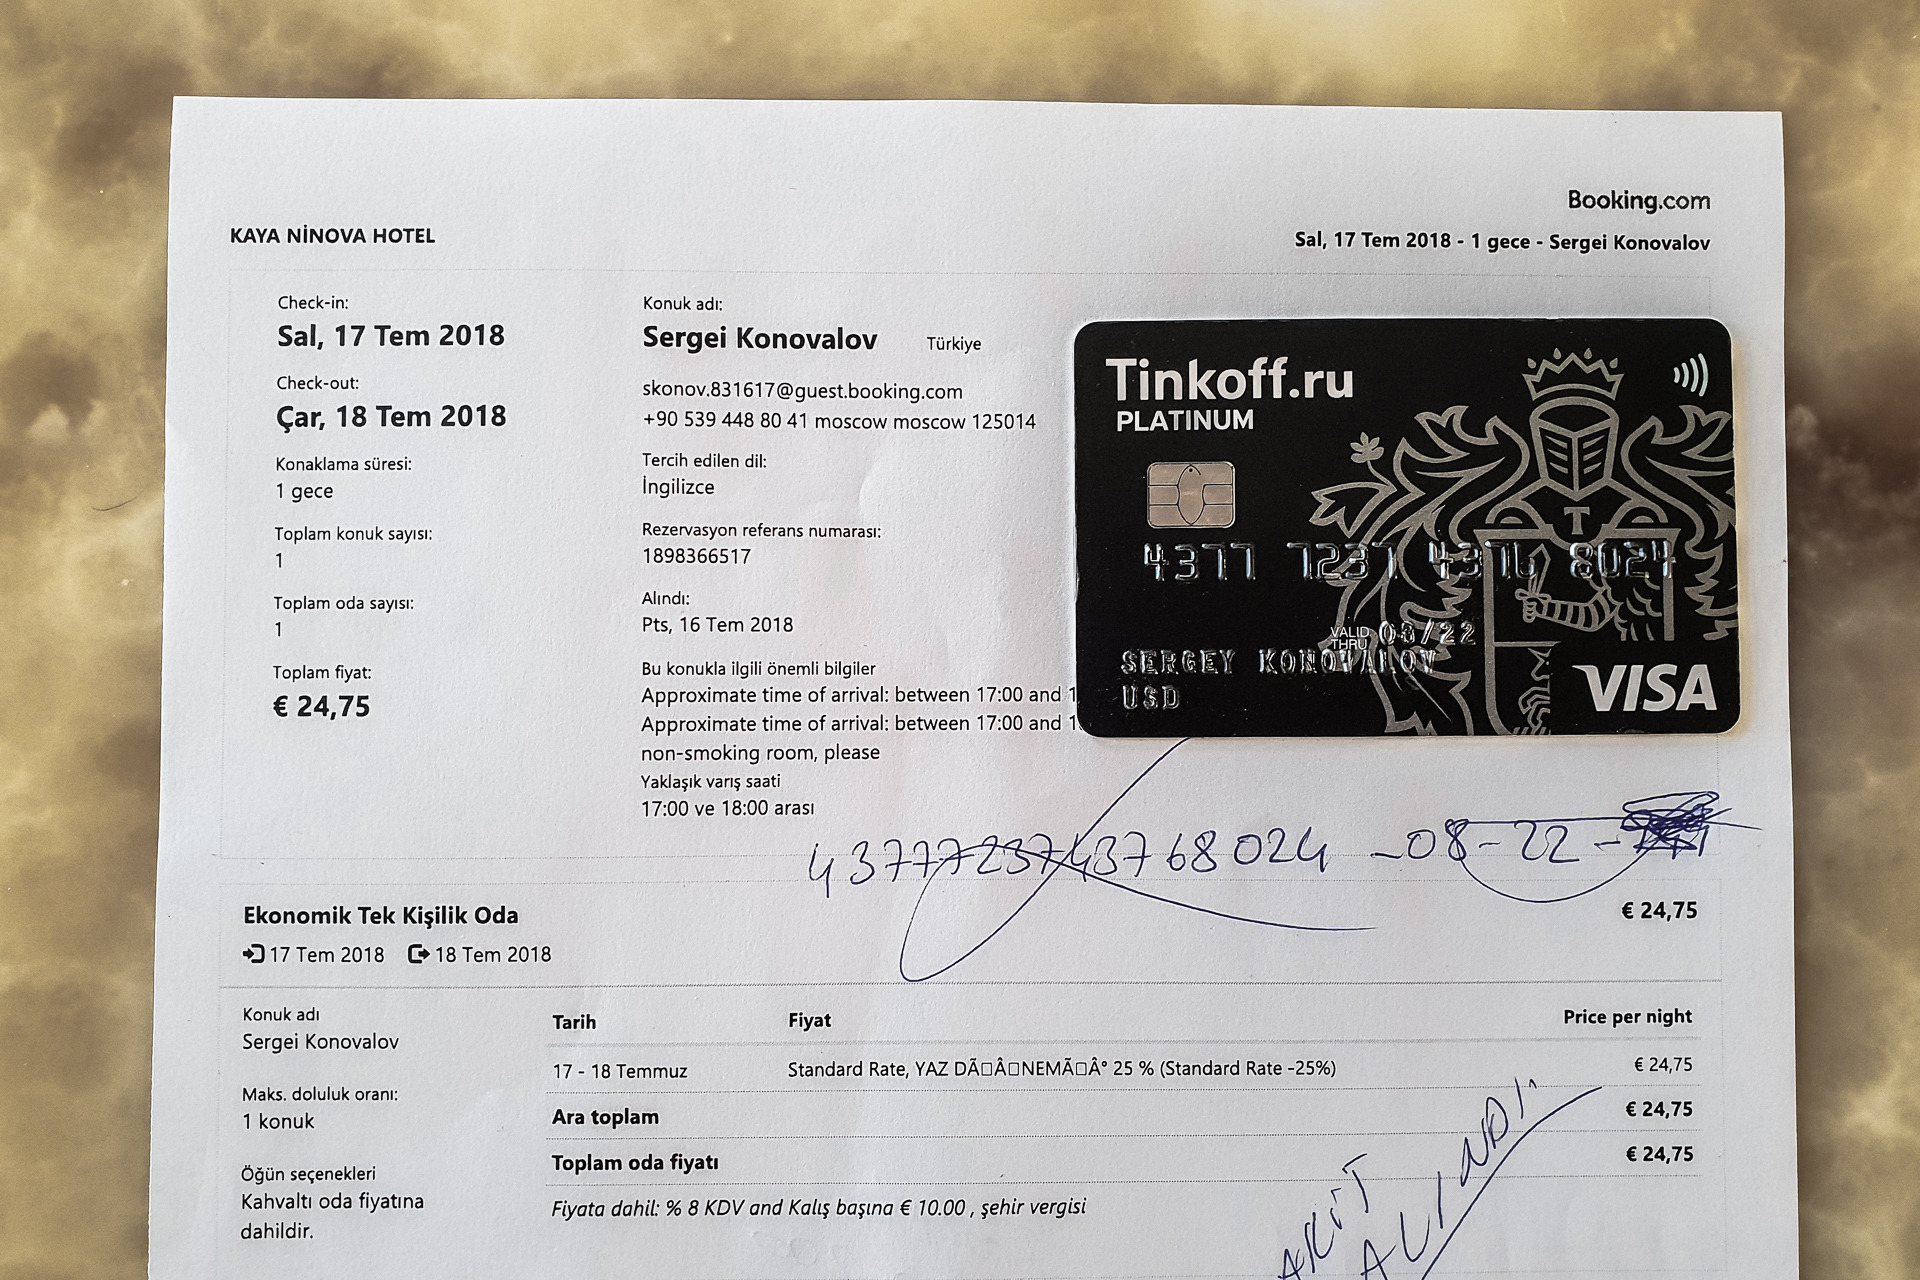 Tinkoff card used in Booking.com